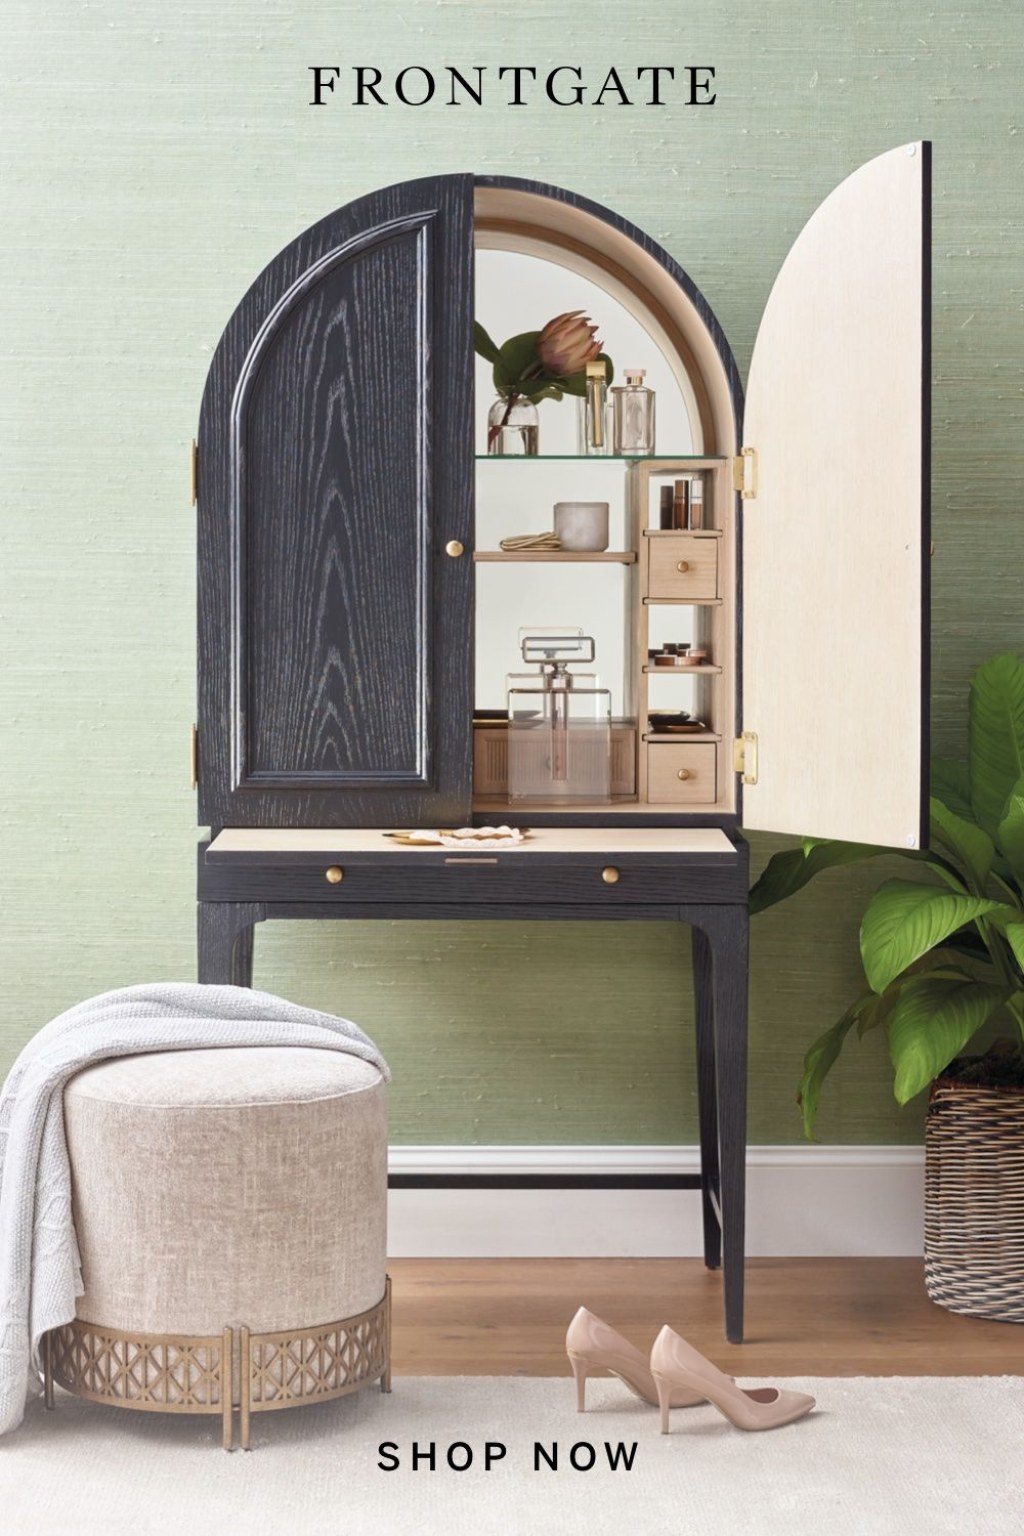 Picture of: Isadora Multifunctional Cabinet  Frontgate  Home decor, Luxury